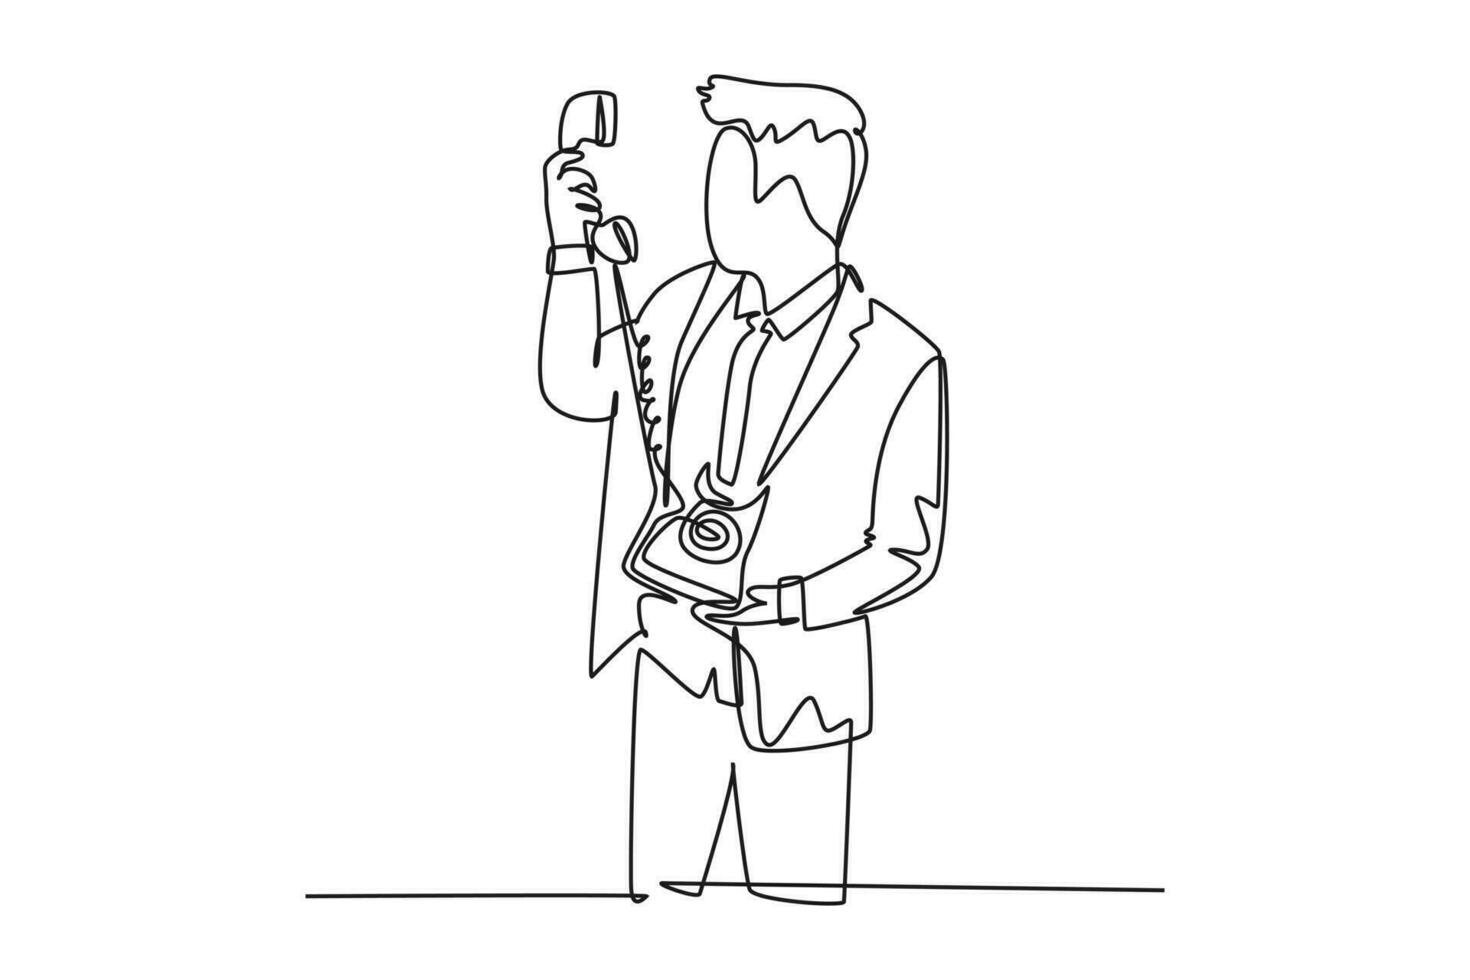 Single one line drawing young of angry businessman shouting his staff on phone to give him a lesson. Furious business problem at office concept. Continuous line draw design graphic vector illustration